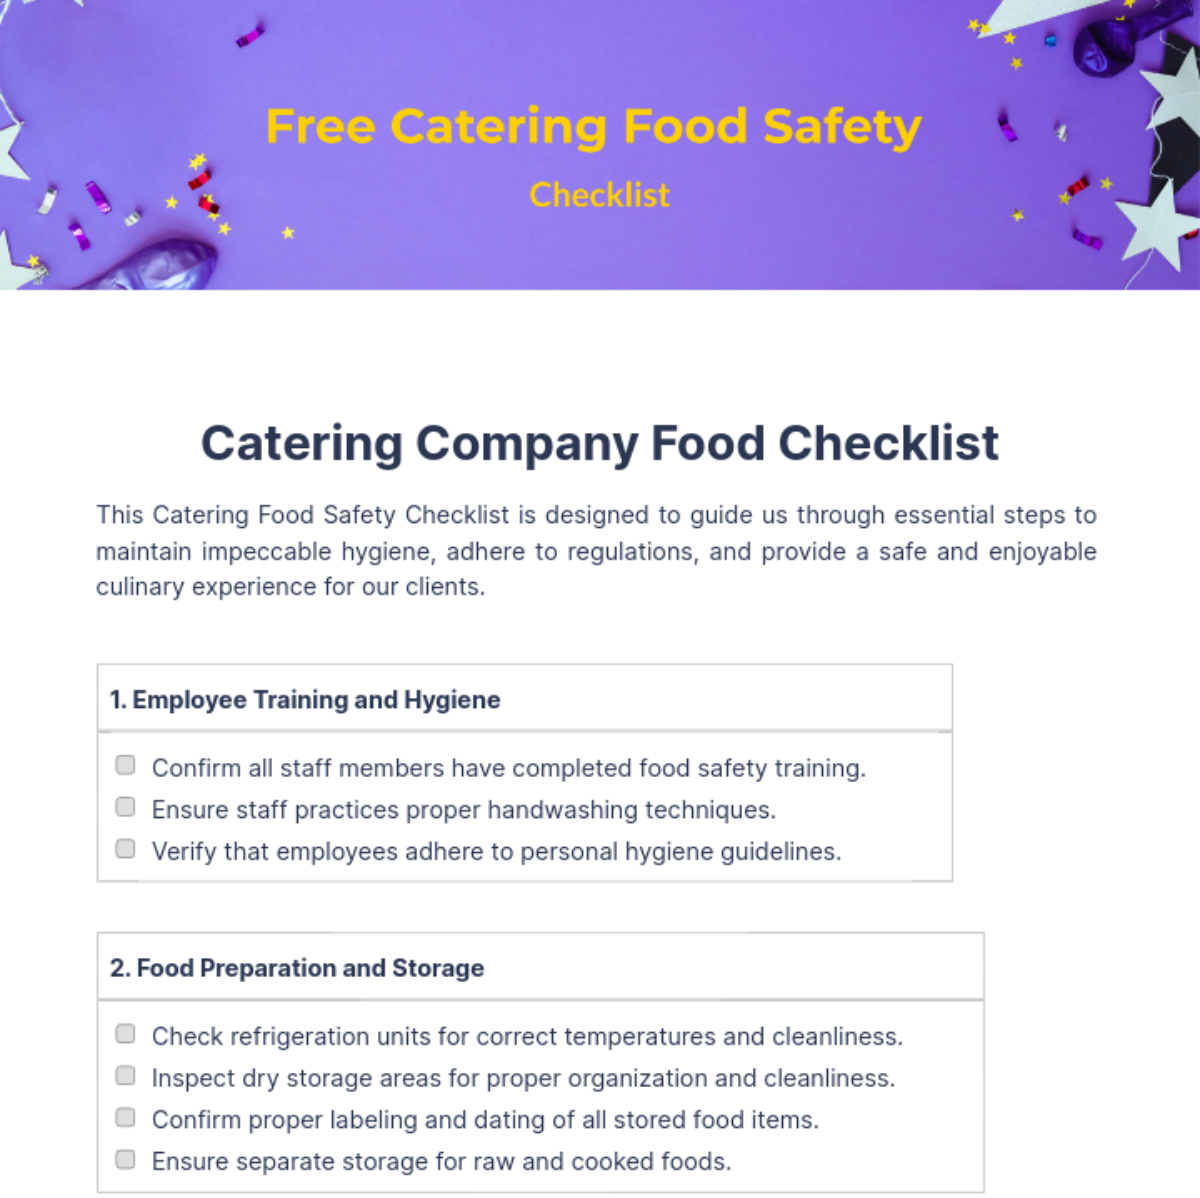 Free Catering Food Safety Checklist Template